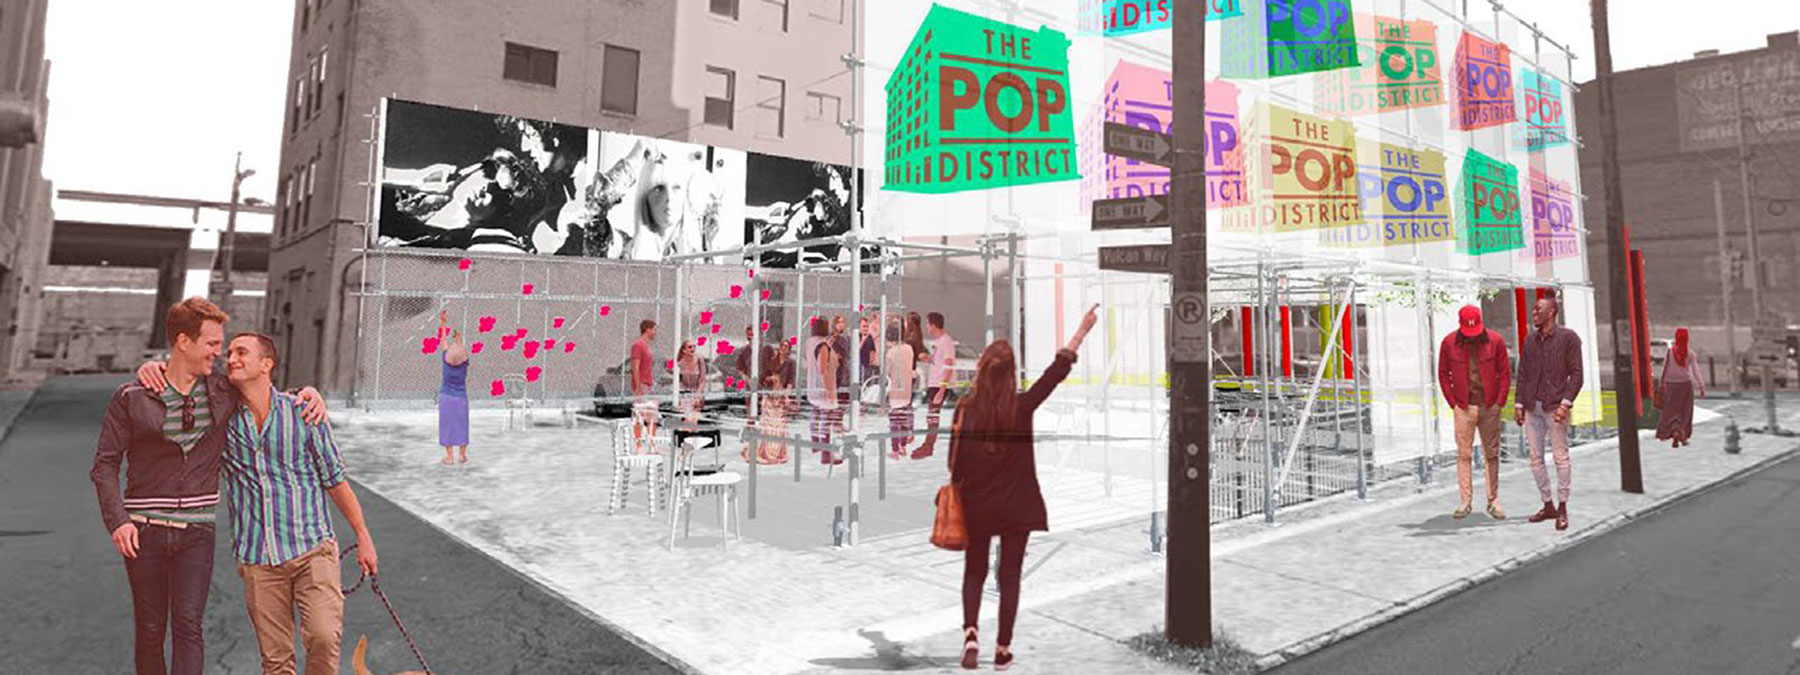 An artist's rendering of the Warhol Pop District